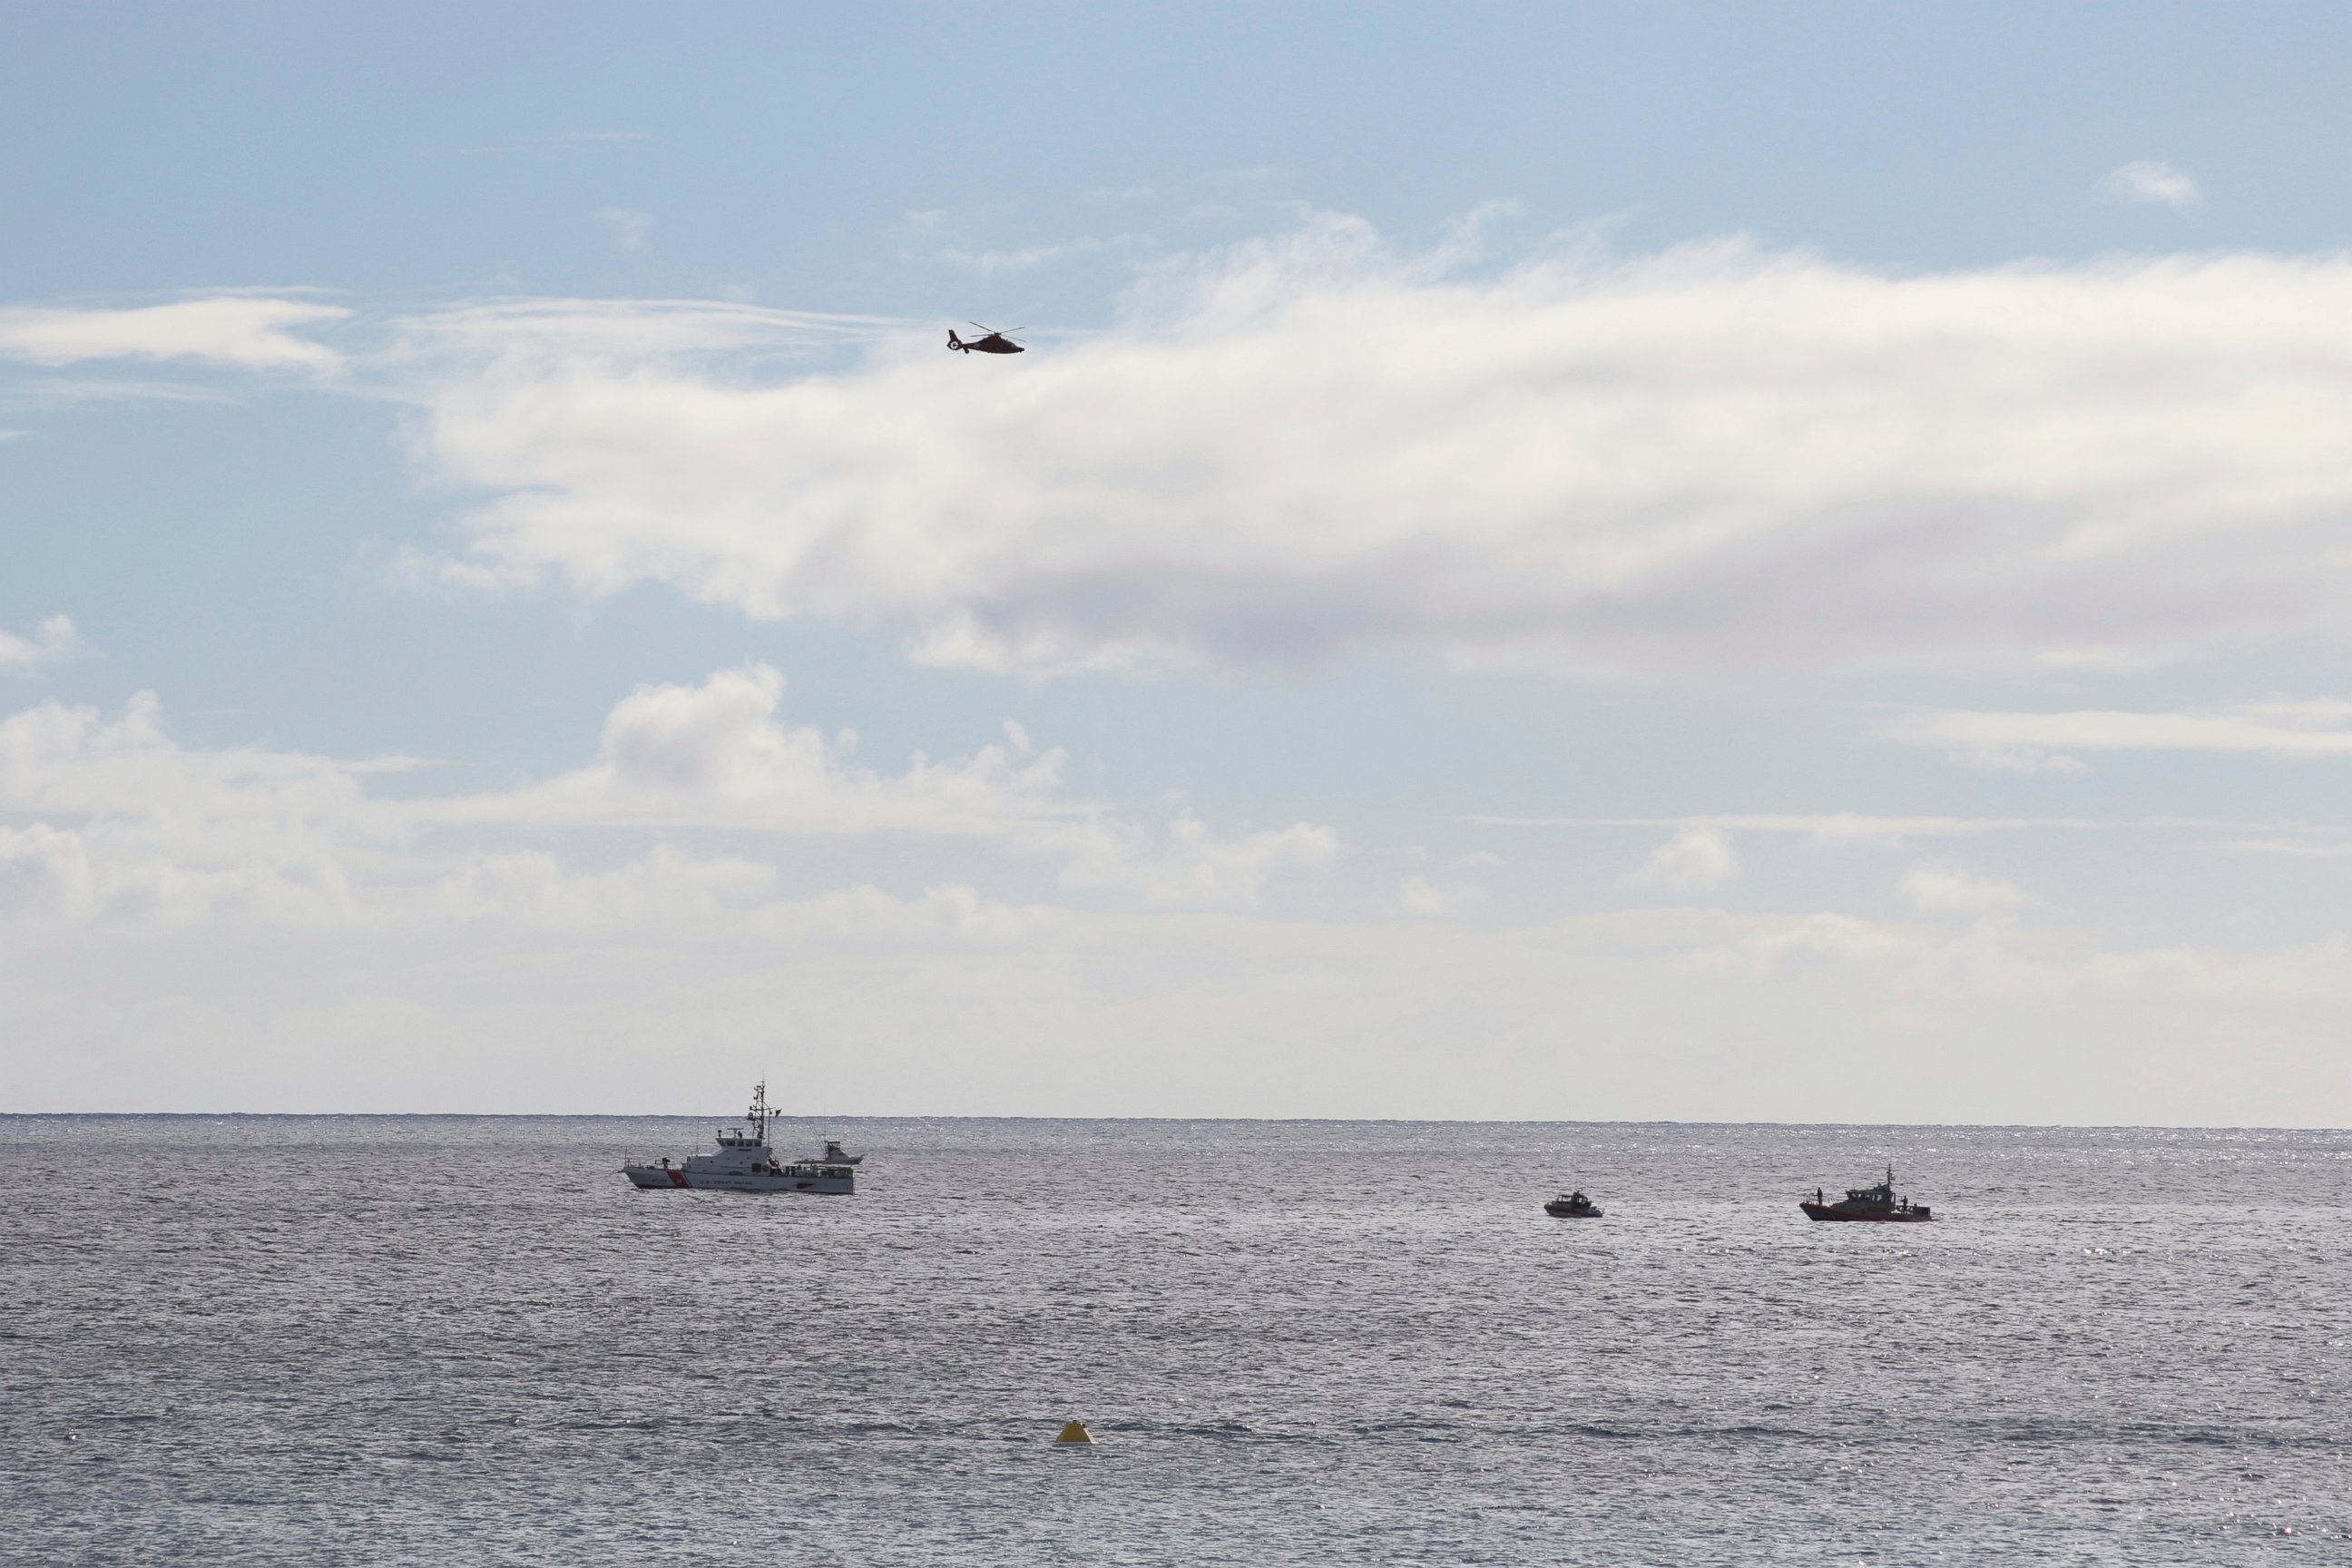 PHOTO: A U.S. Coast Guard vessel and other rescue boats respond to a plane crash off Honolulu, Wednesday, Dec. 12, 2018. Federal Aviation Administration spokesman Ian Gregor said a Hawker Hunter jet went down in the ocean around 2:25 p.m.